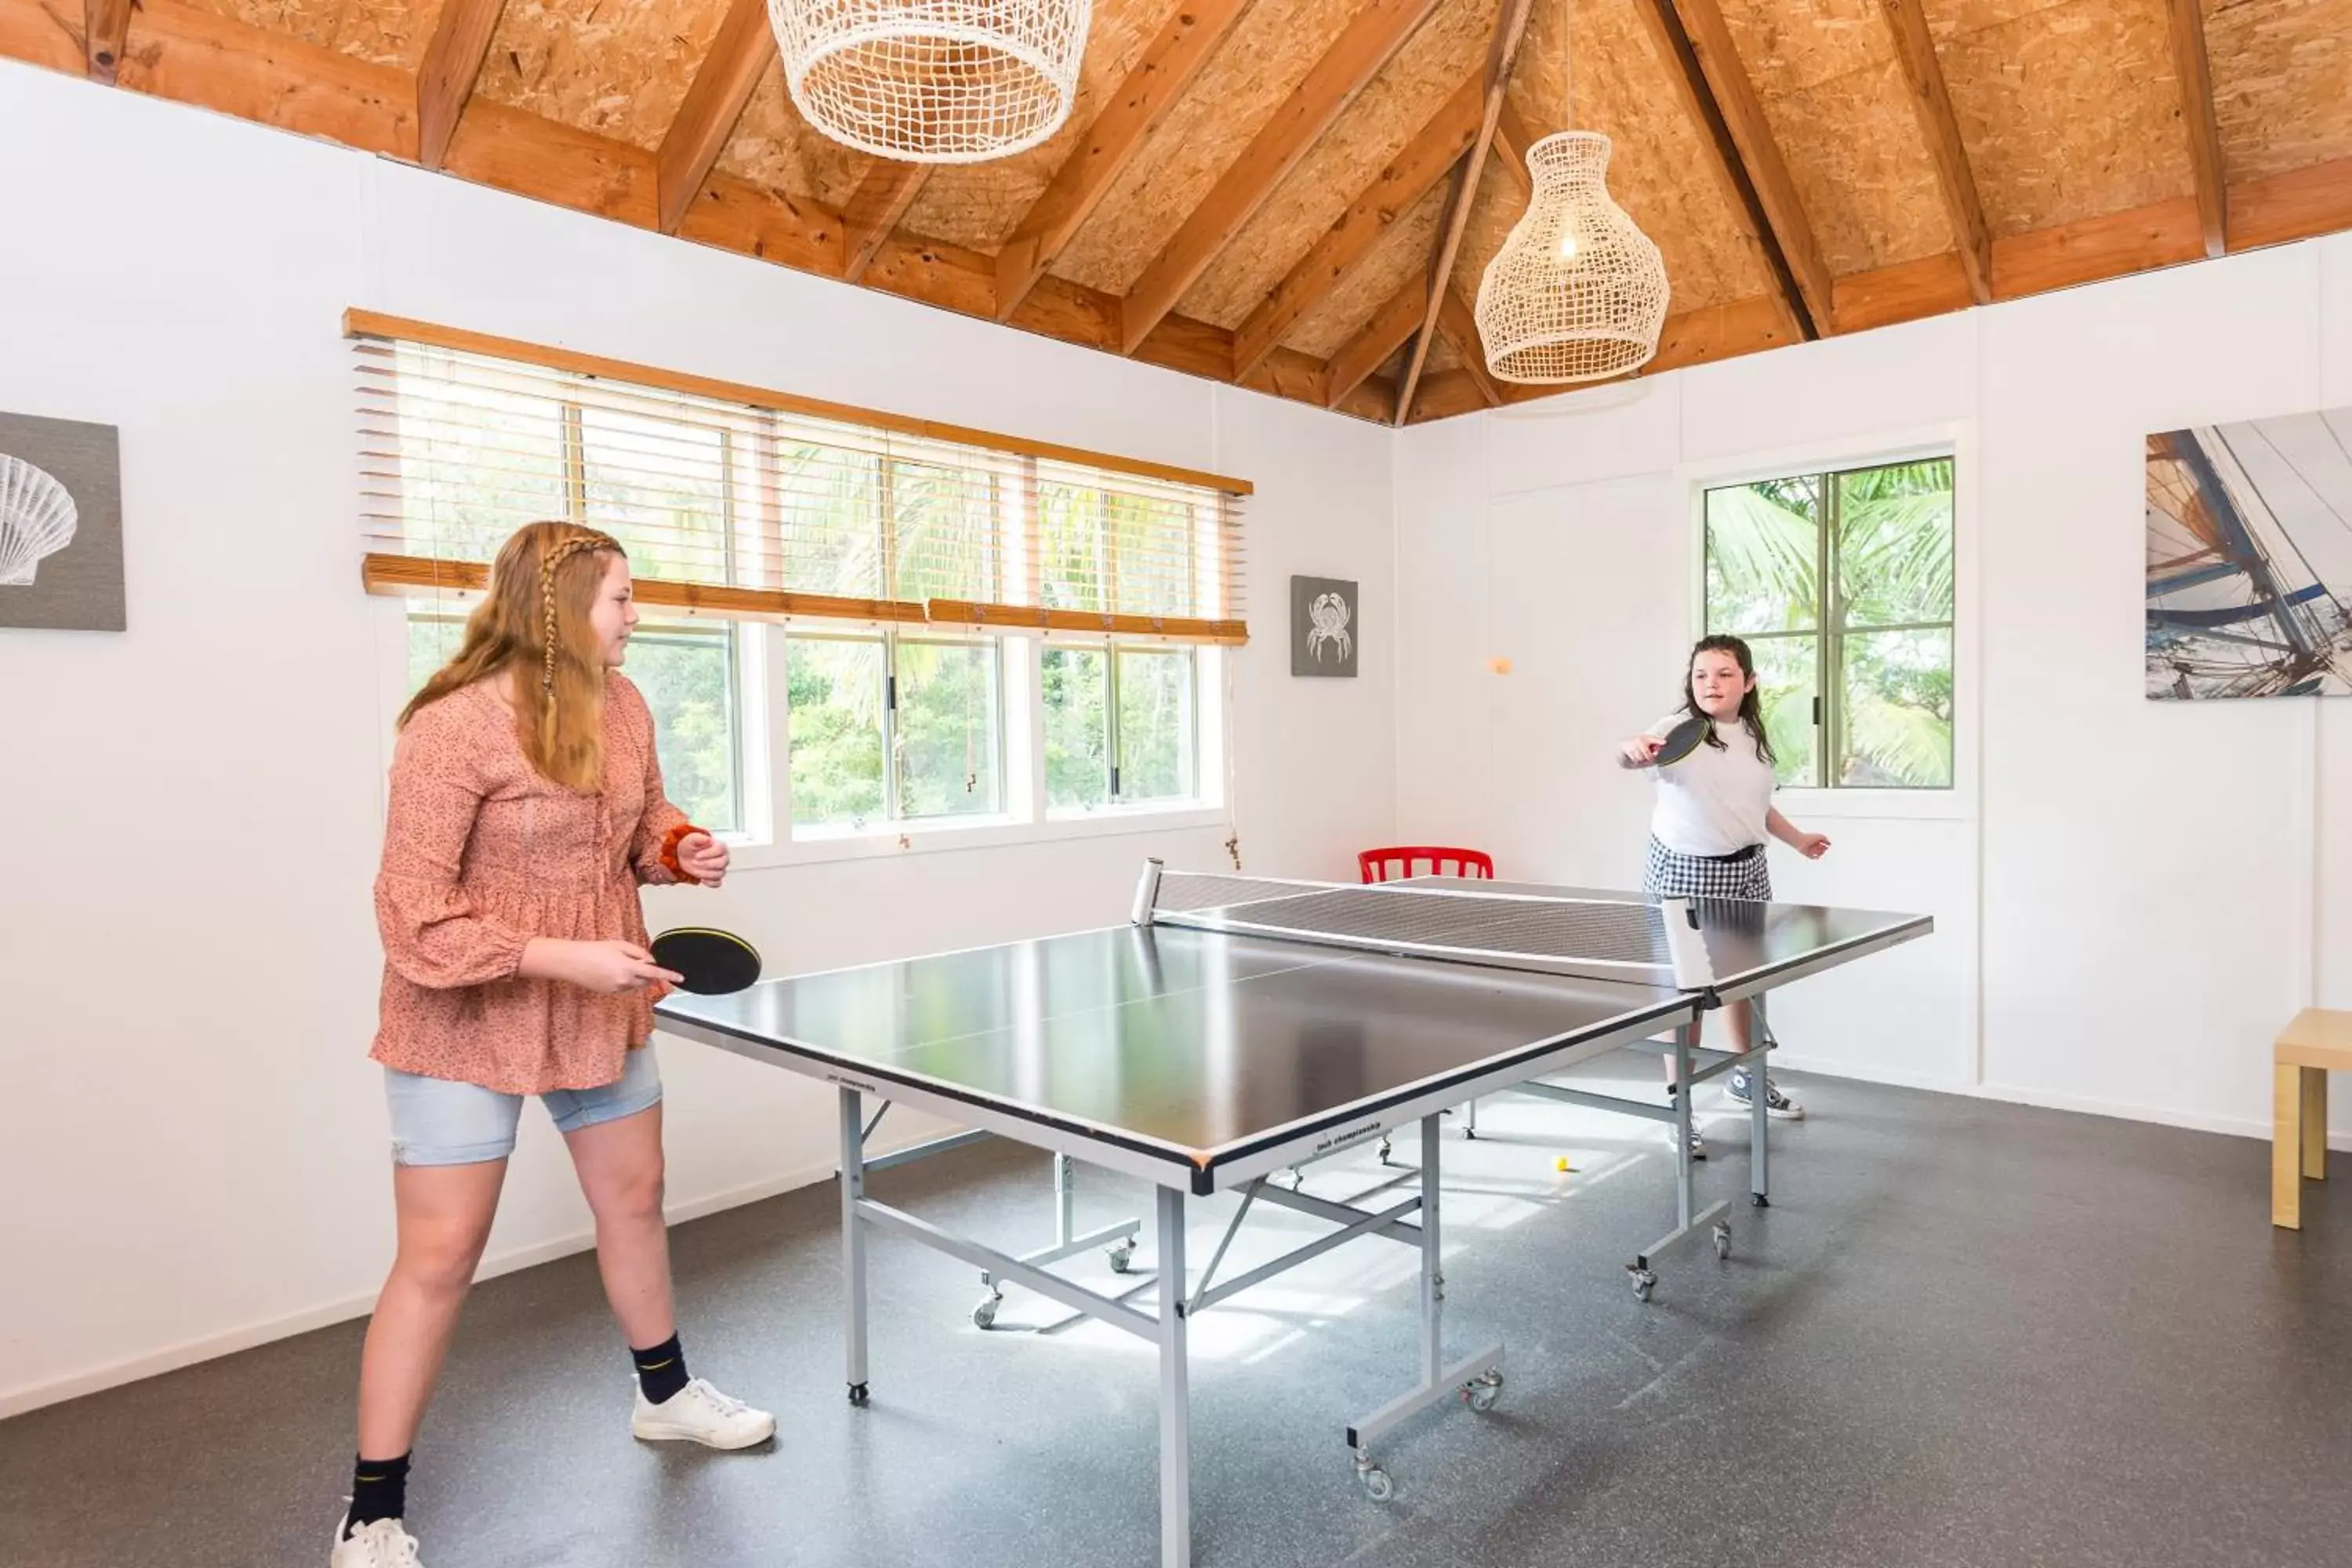 Table Tennis in The Oasis Apartments and Treetop Houses